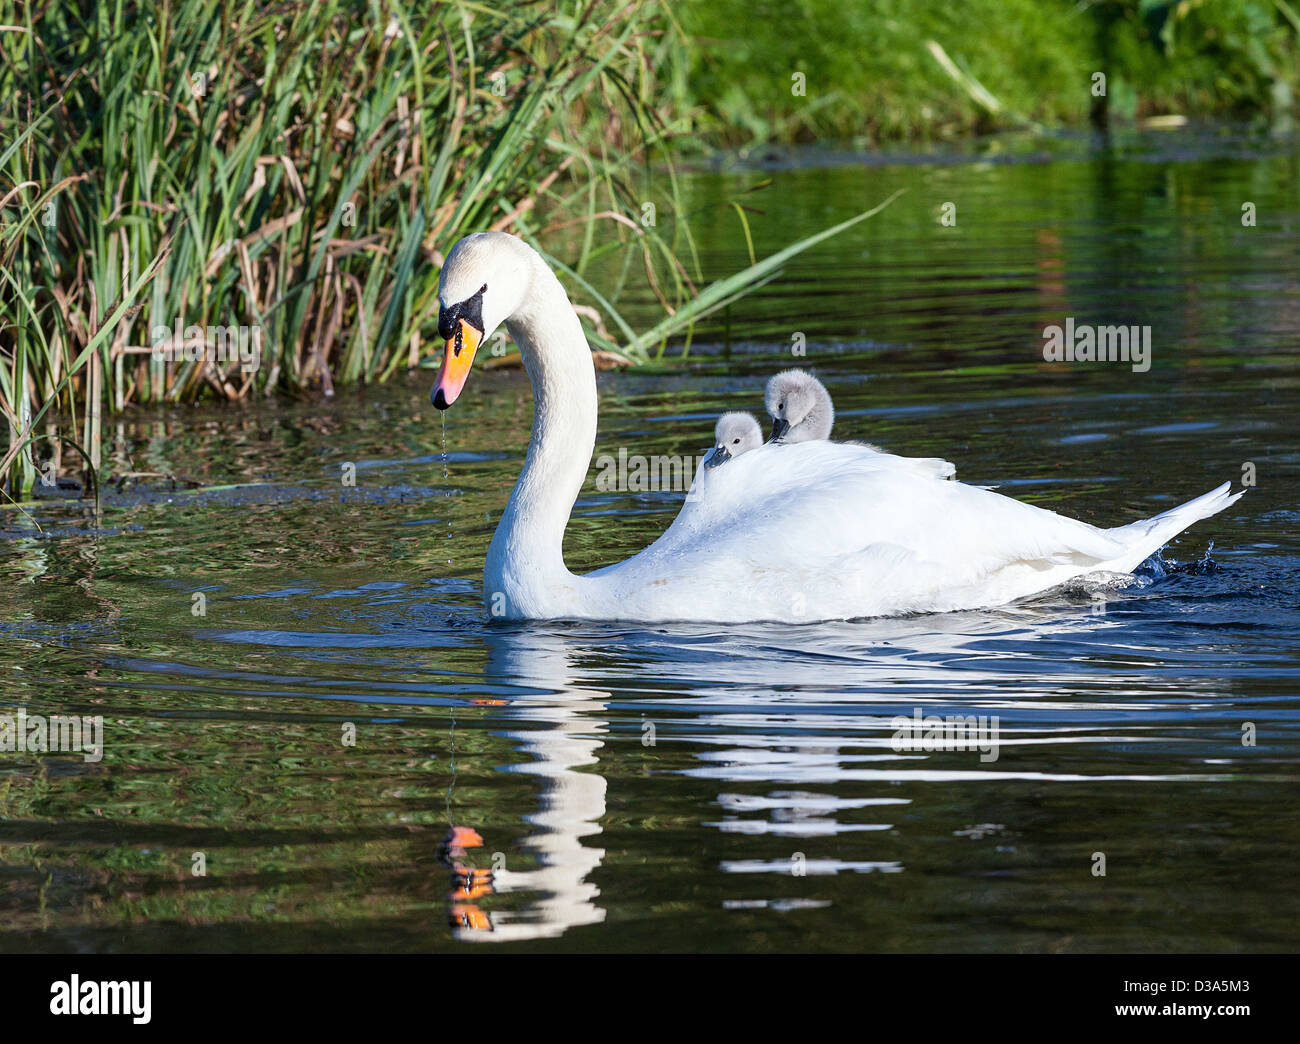 A Hen swan carries her 2 cygnets on her back in the warm spring sunshine. Stock Photo